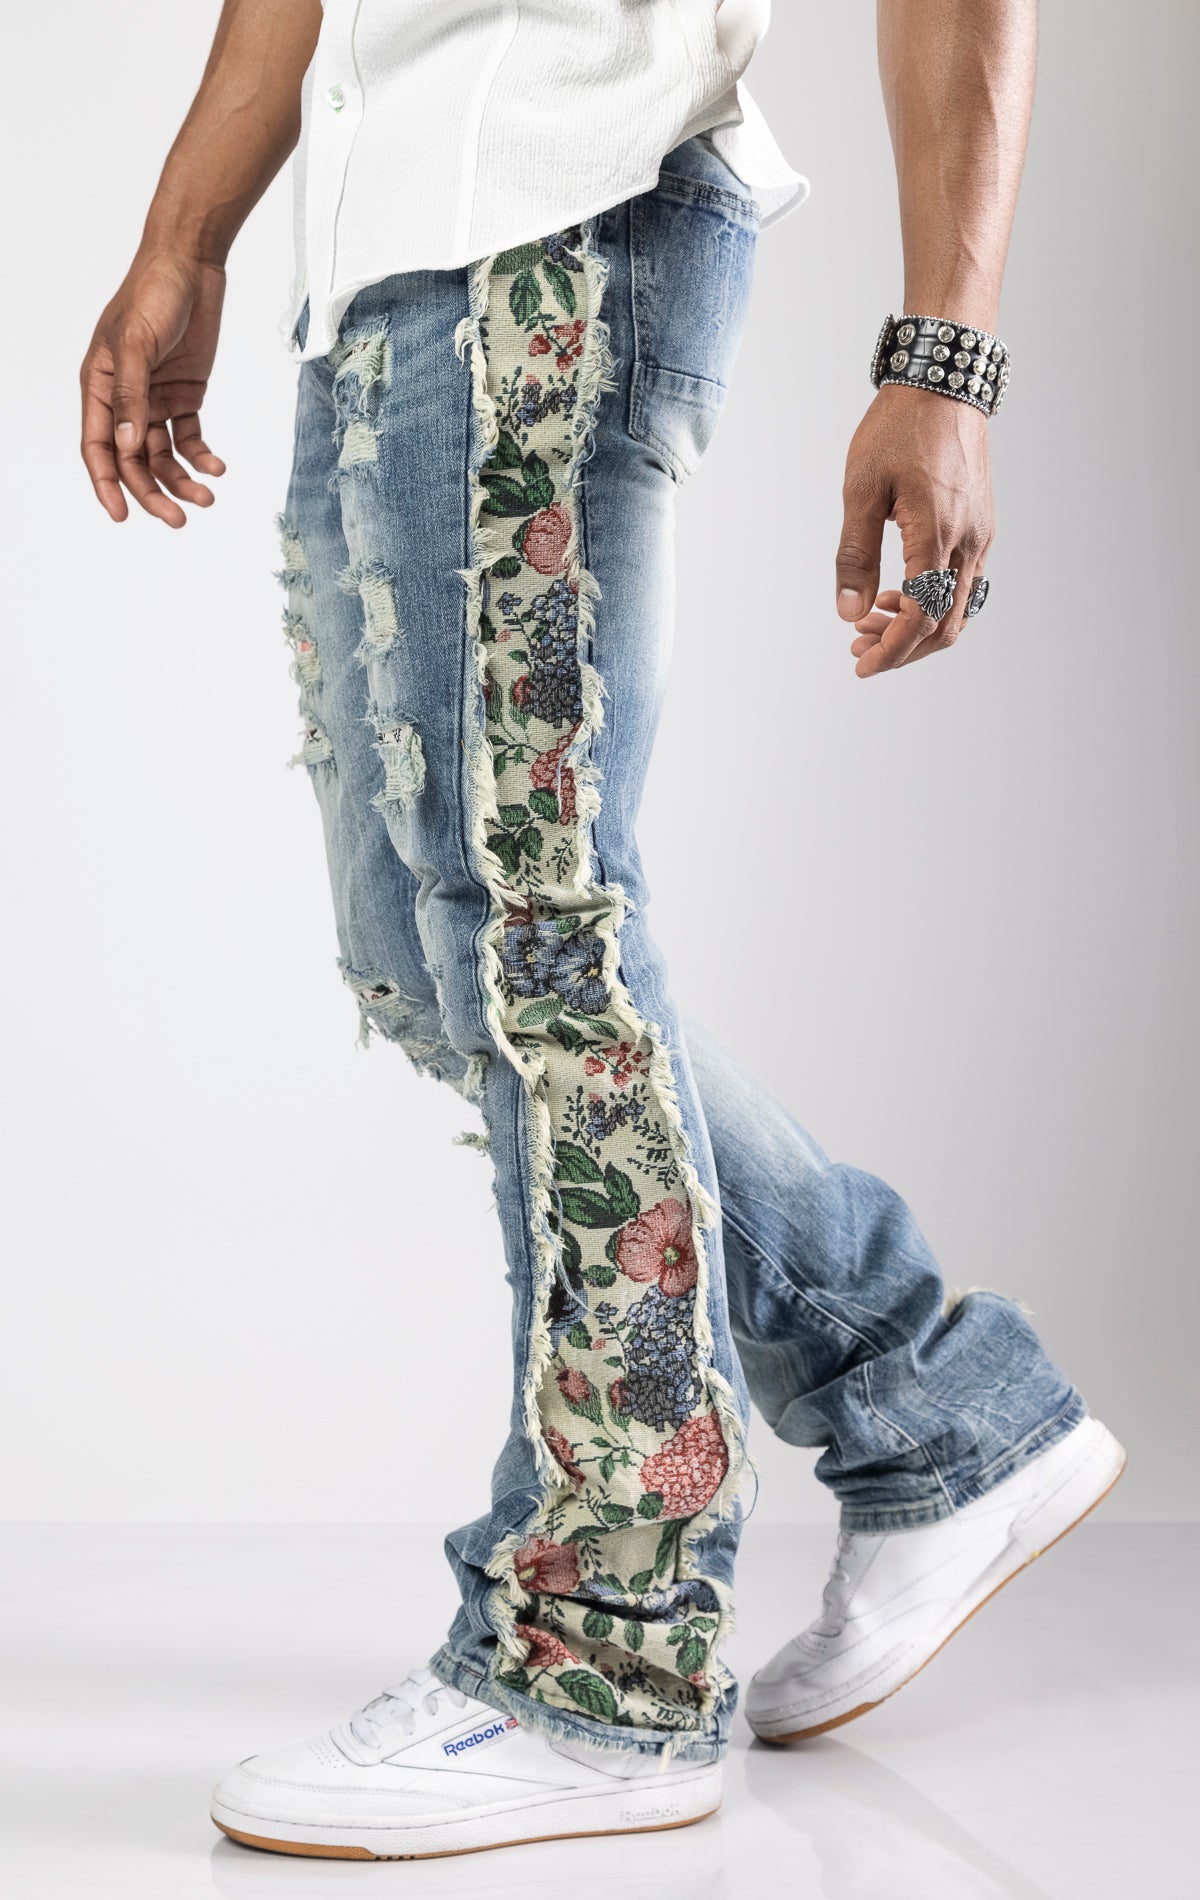 Tapestry Insert Stacked Denim Jeans in Hillside Blue. Slim fit jeans with stacked effect at the ankle.